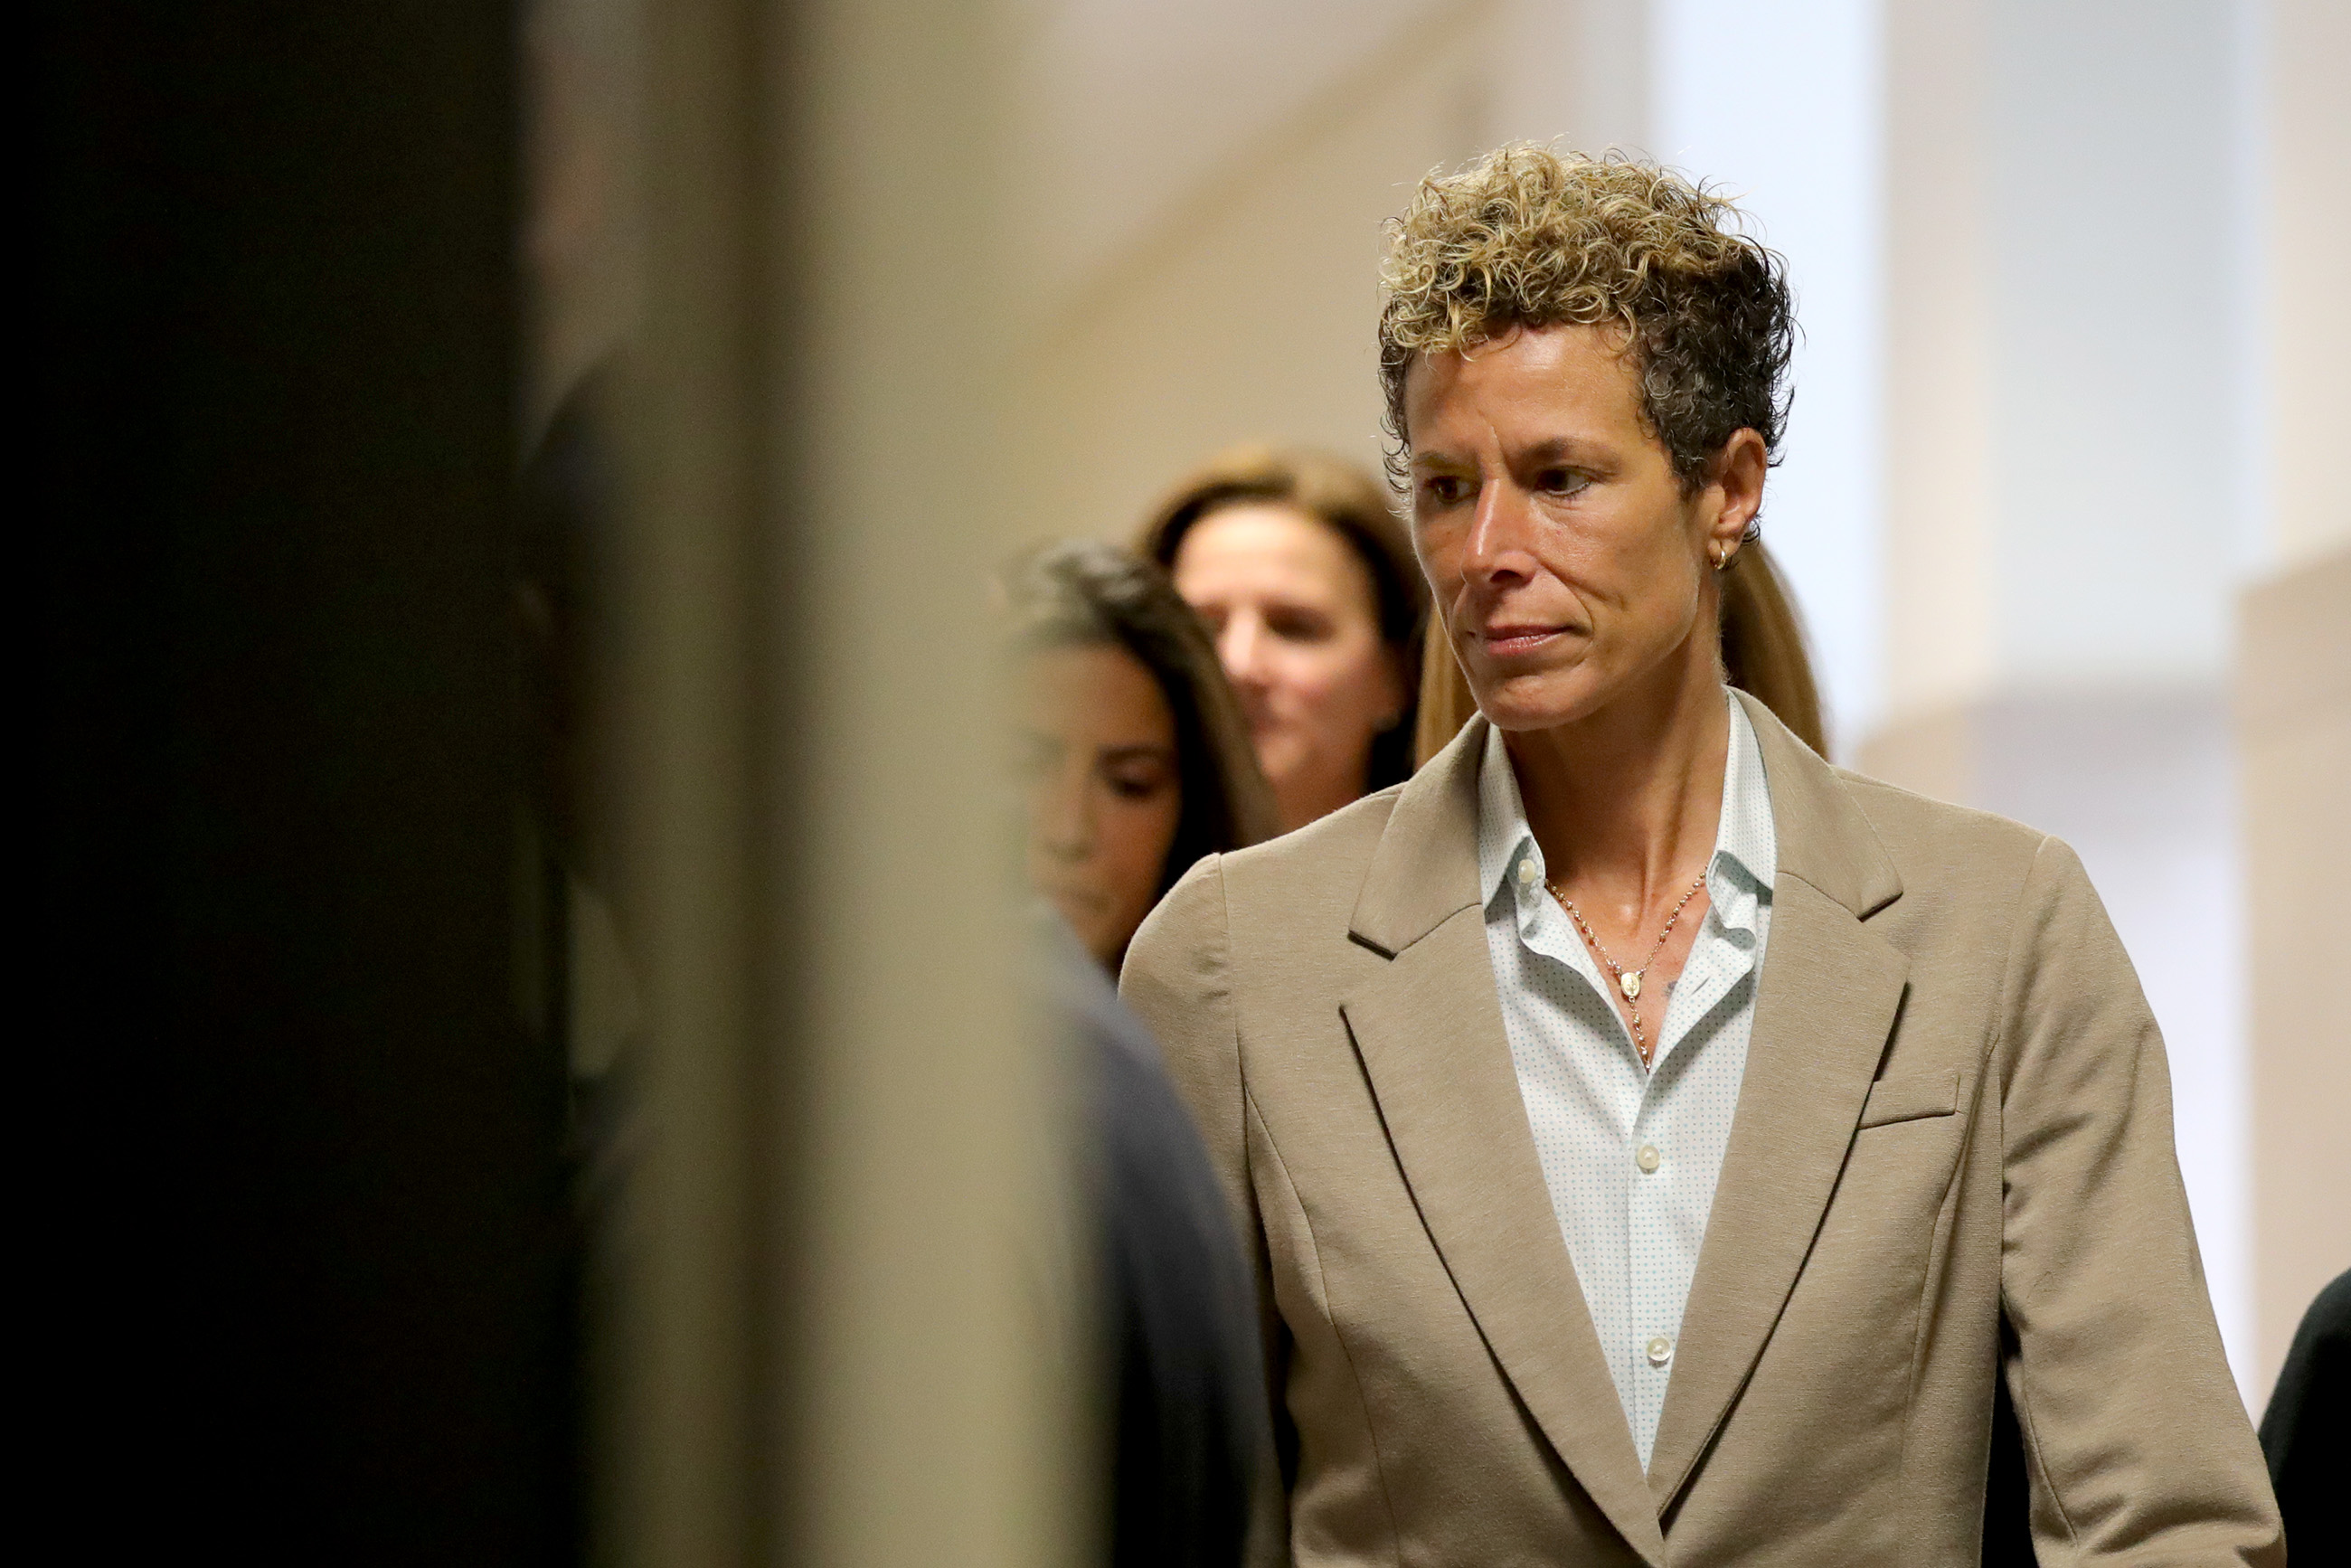 Andrea Constand arrives at the sentencing hearing for the sexual assault trial of entertainer Bill Cosby at the Montgomery County Courthouse September 24, 2018 in Norristown, Pennsylvania. (Pool—Getty Images) (Pool&mdash;Getty Images)